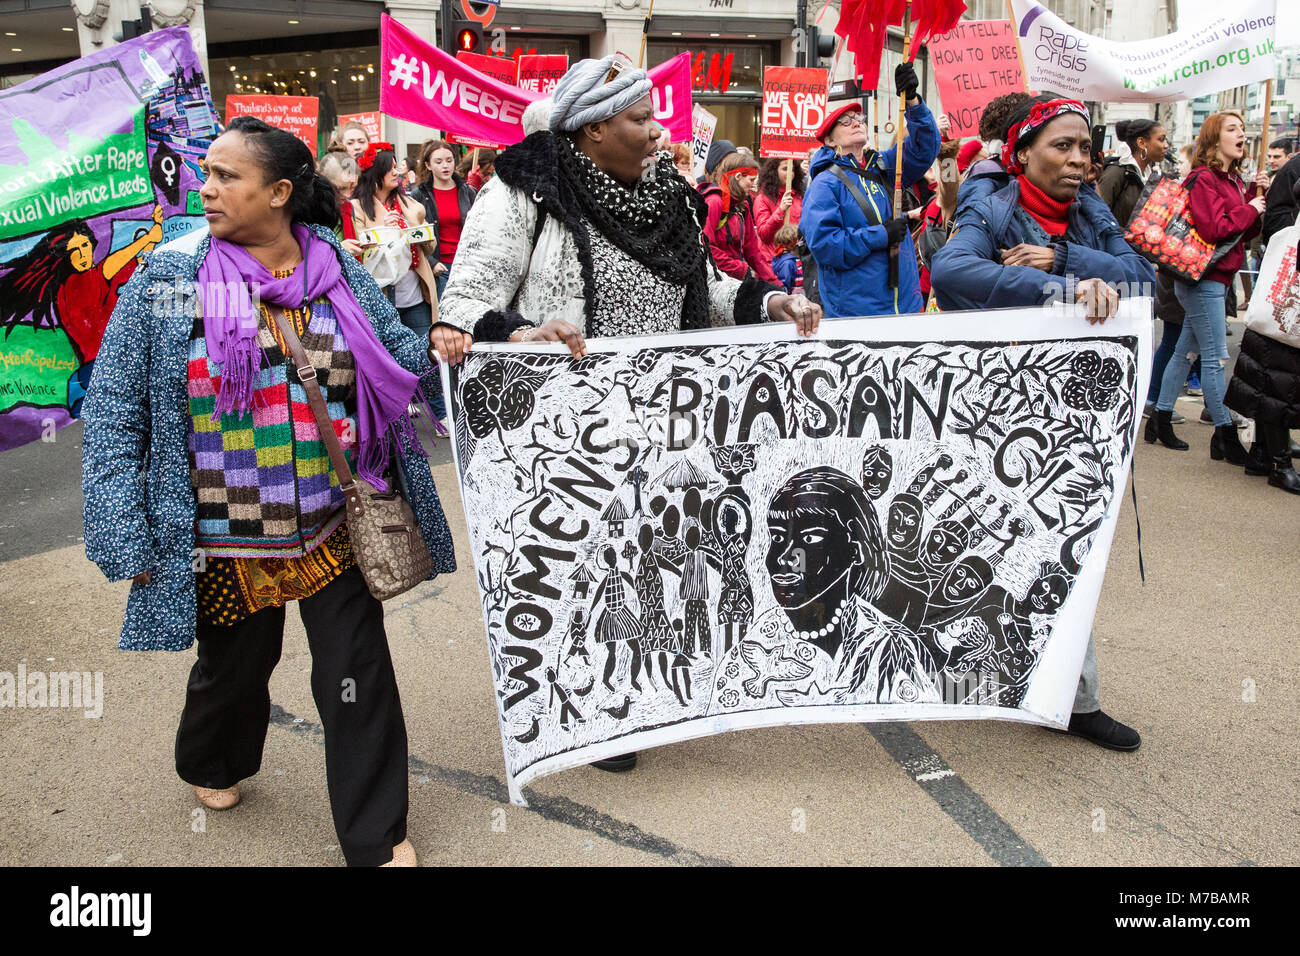 London, UK. 10th March, 2018. Women holding a Women's Biasan Club banner take part in the annual Million Women Rise march through central London against male violence in all its forms. The march takes place on the nearest Saturday to International Women's Day. Credit: Mark Kerrison/Alamy Live News Stock Photo